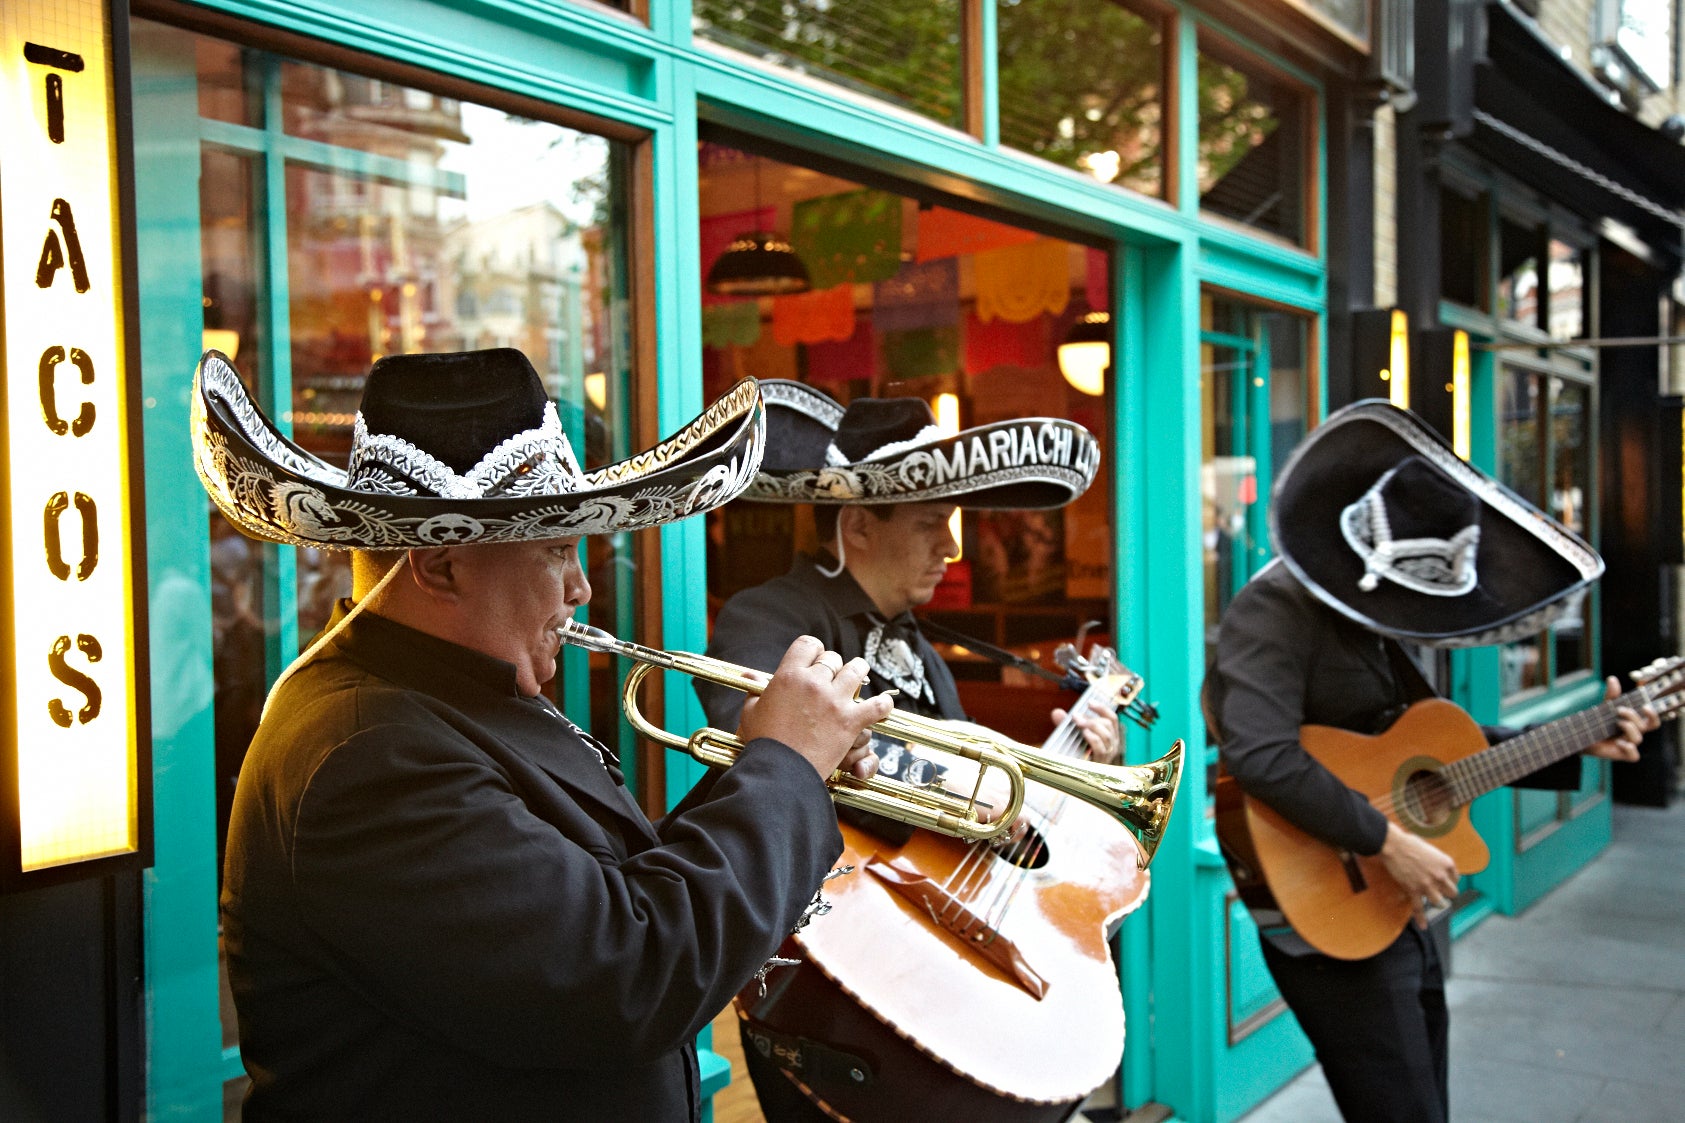 The Mexican Mariachi Band